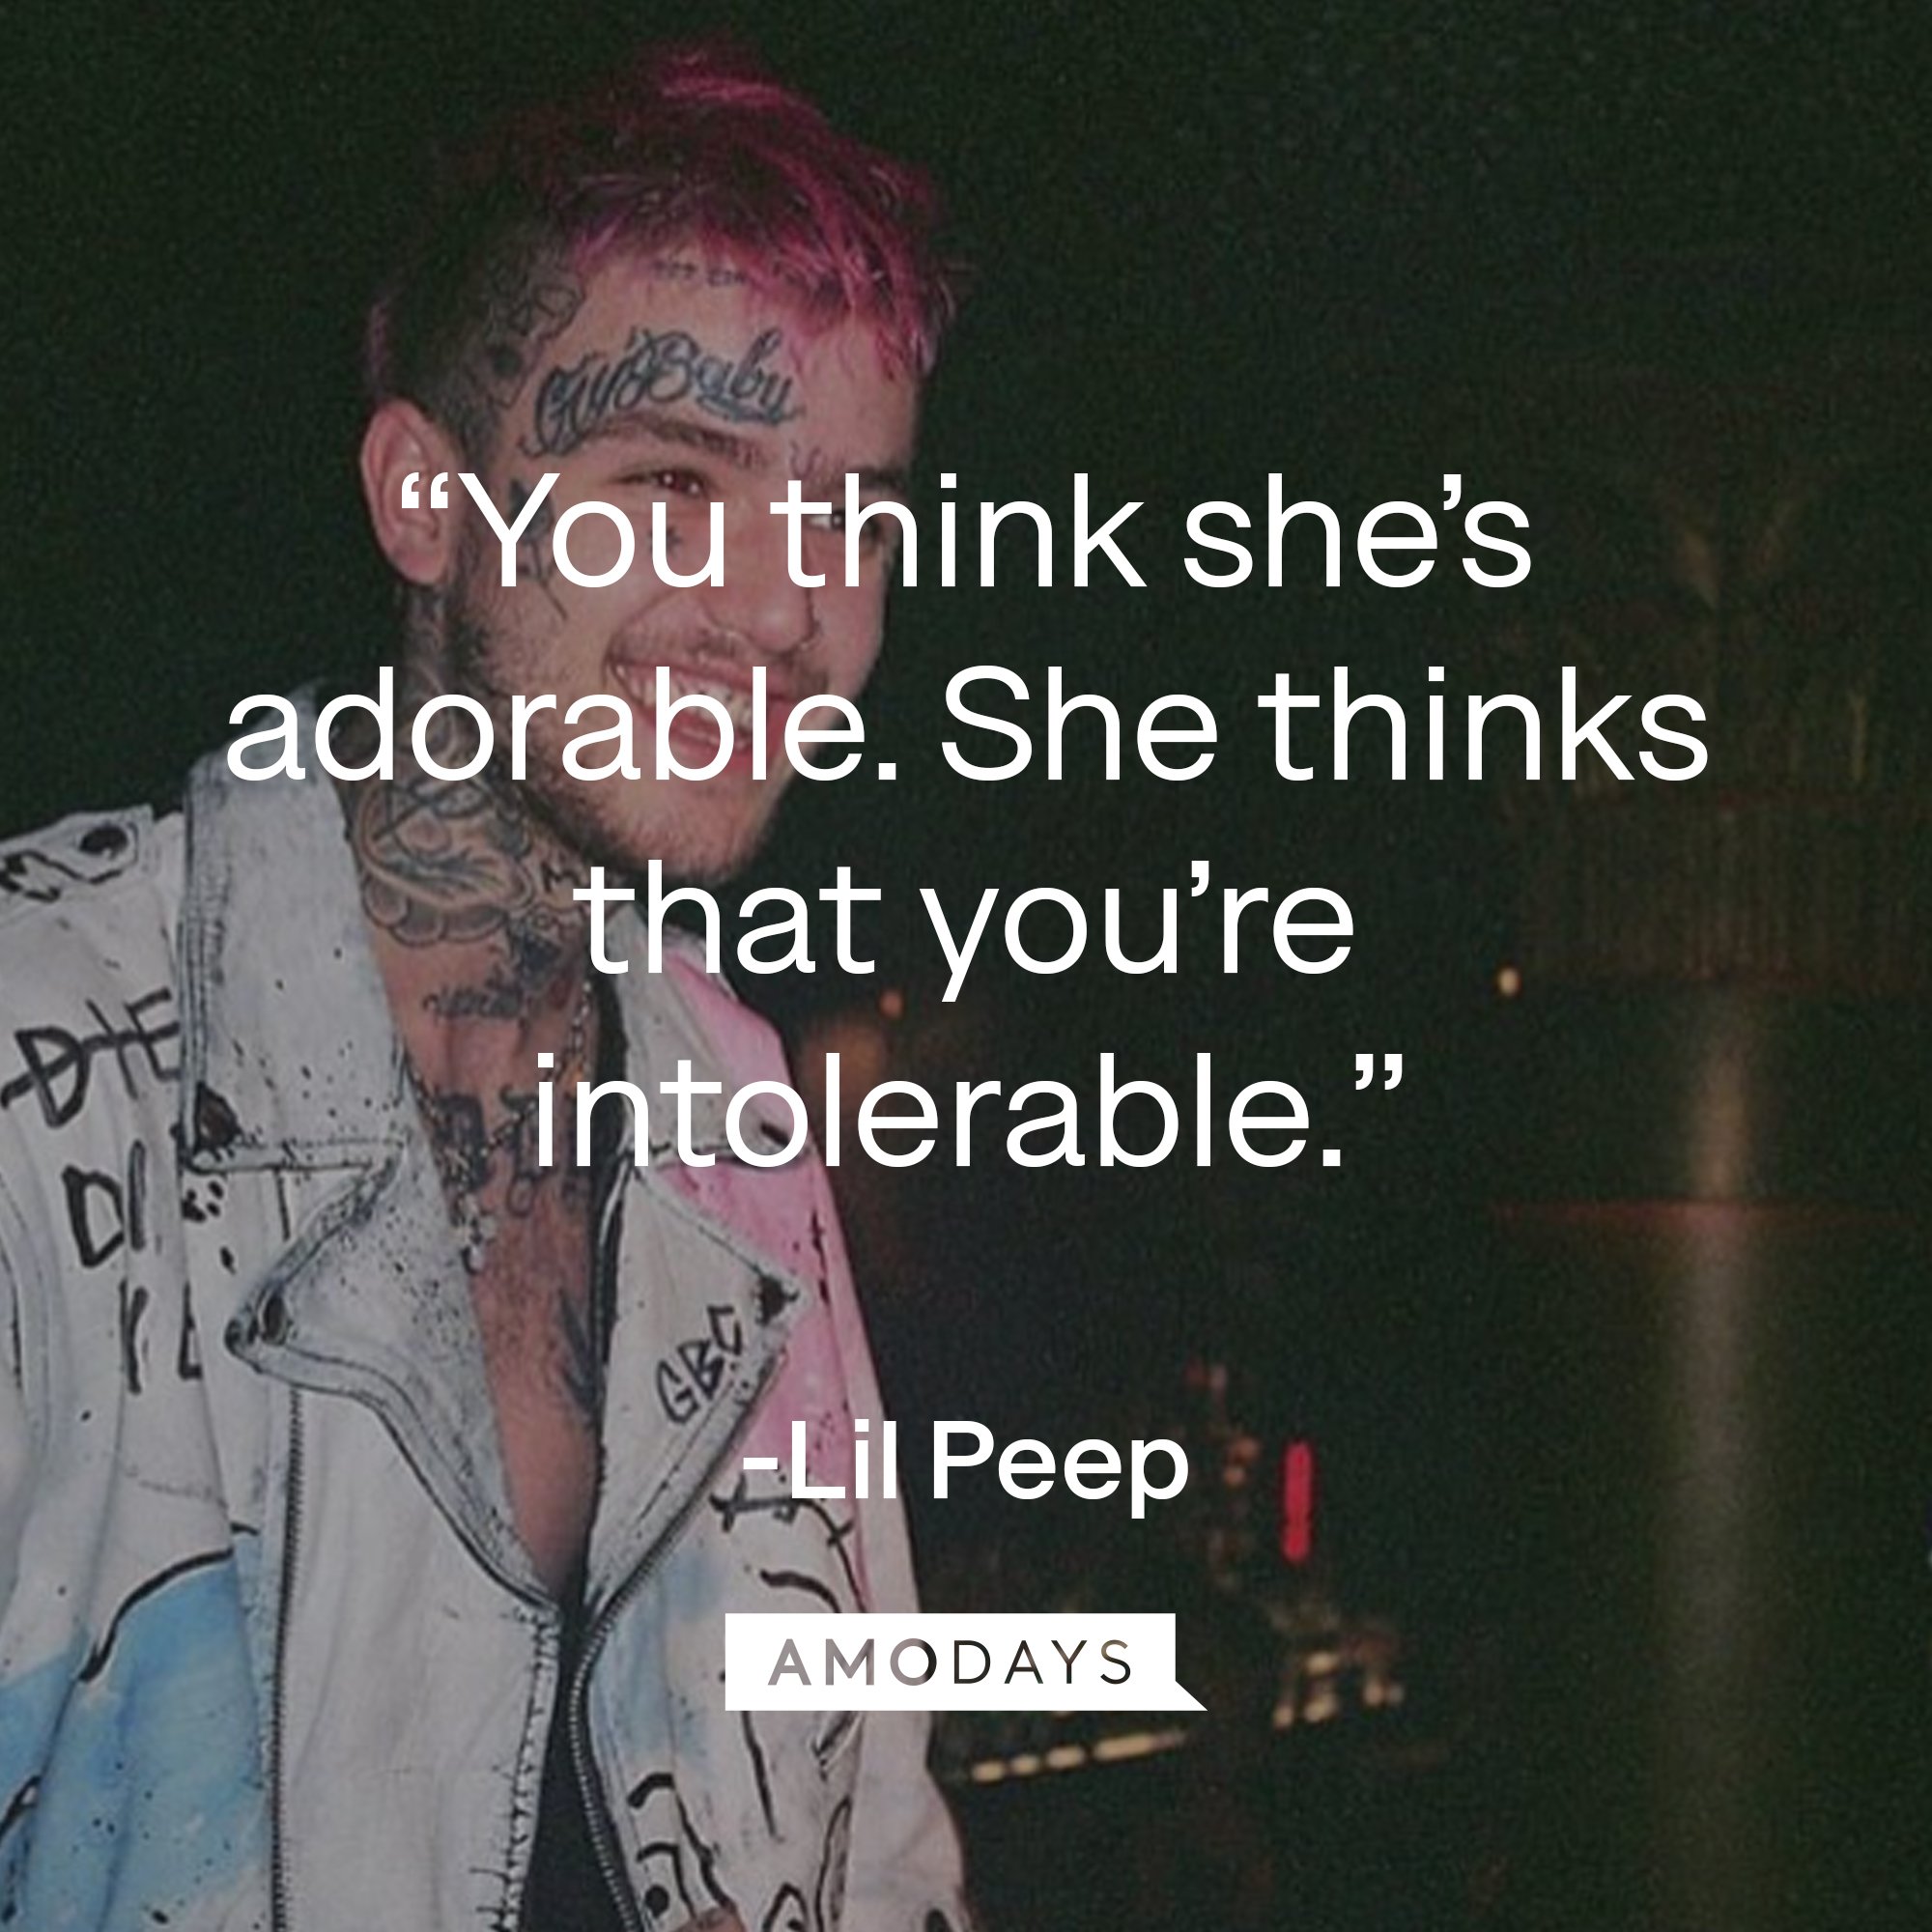 Lil Peep's quote: “You think she’s adorable. She thinks that you’re intolerable.” | Image: AmoDays